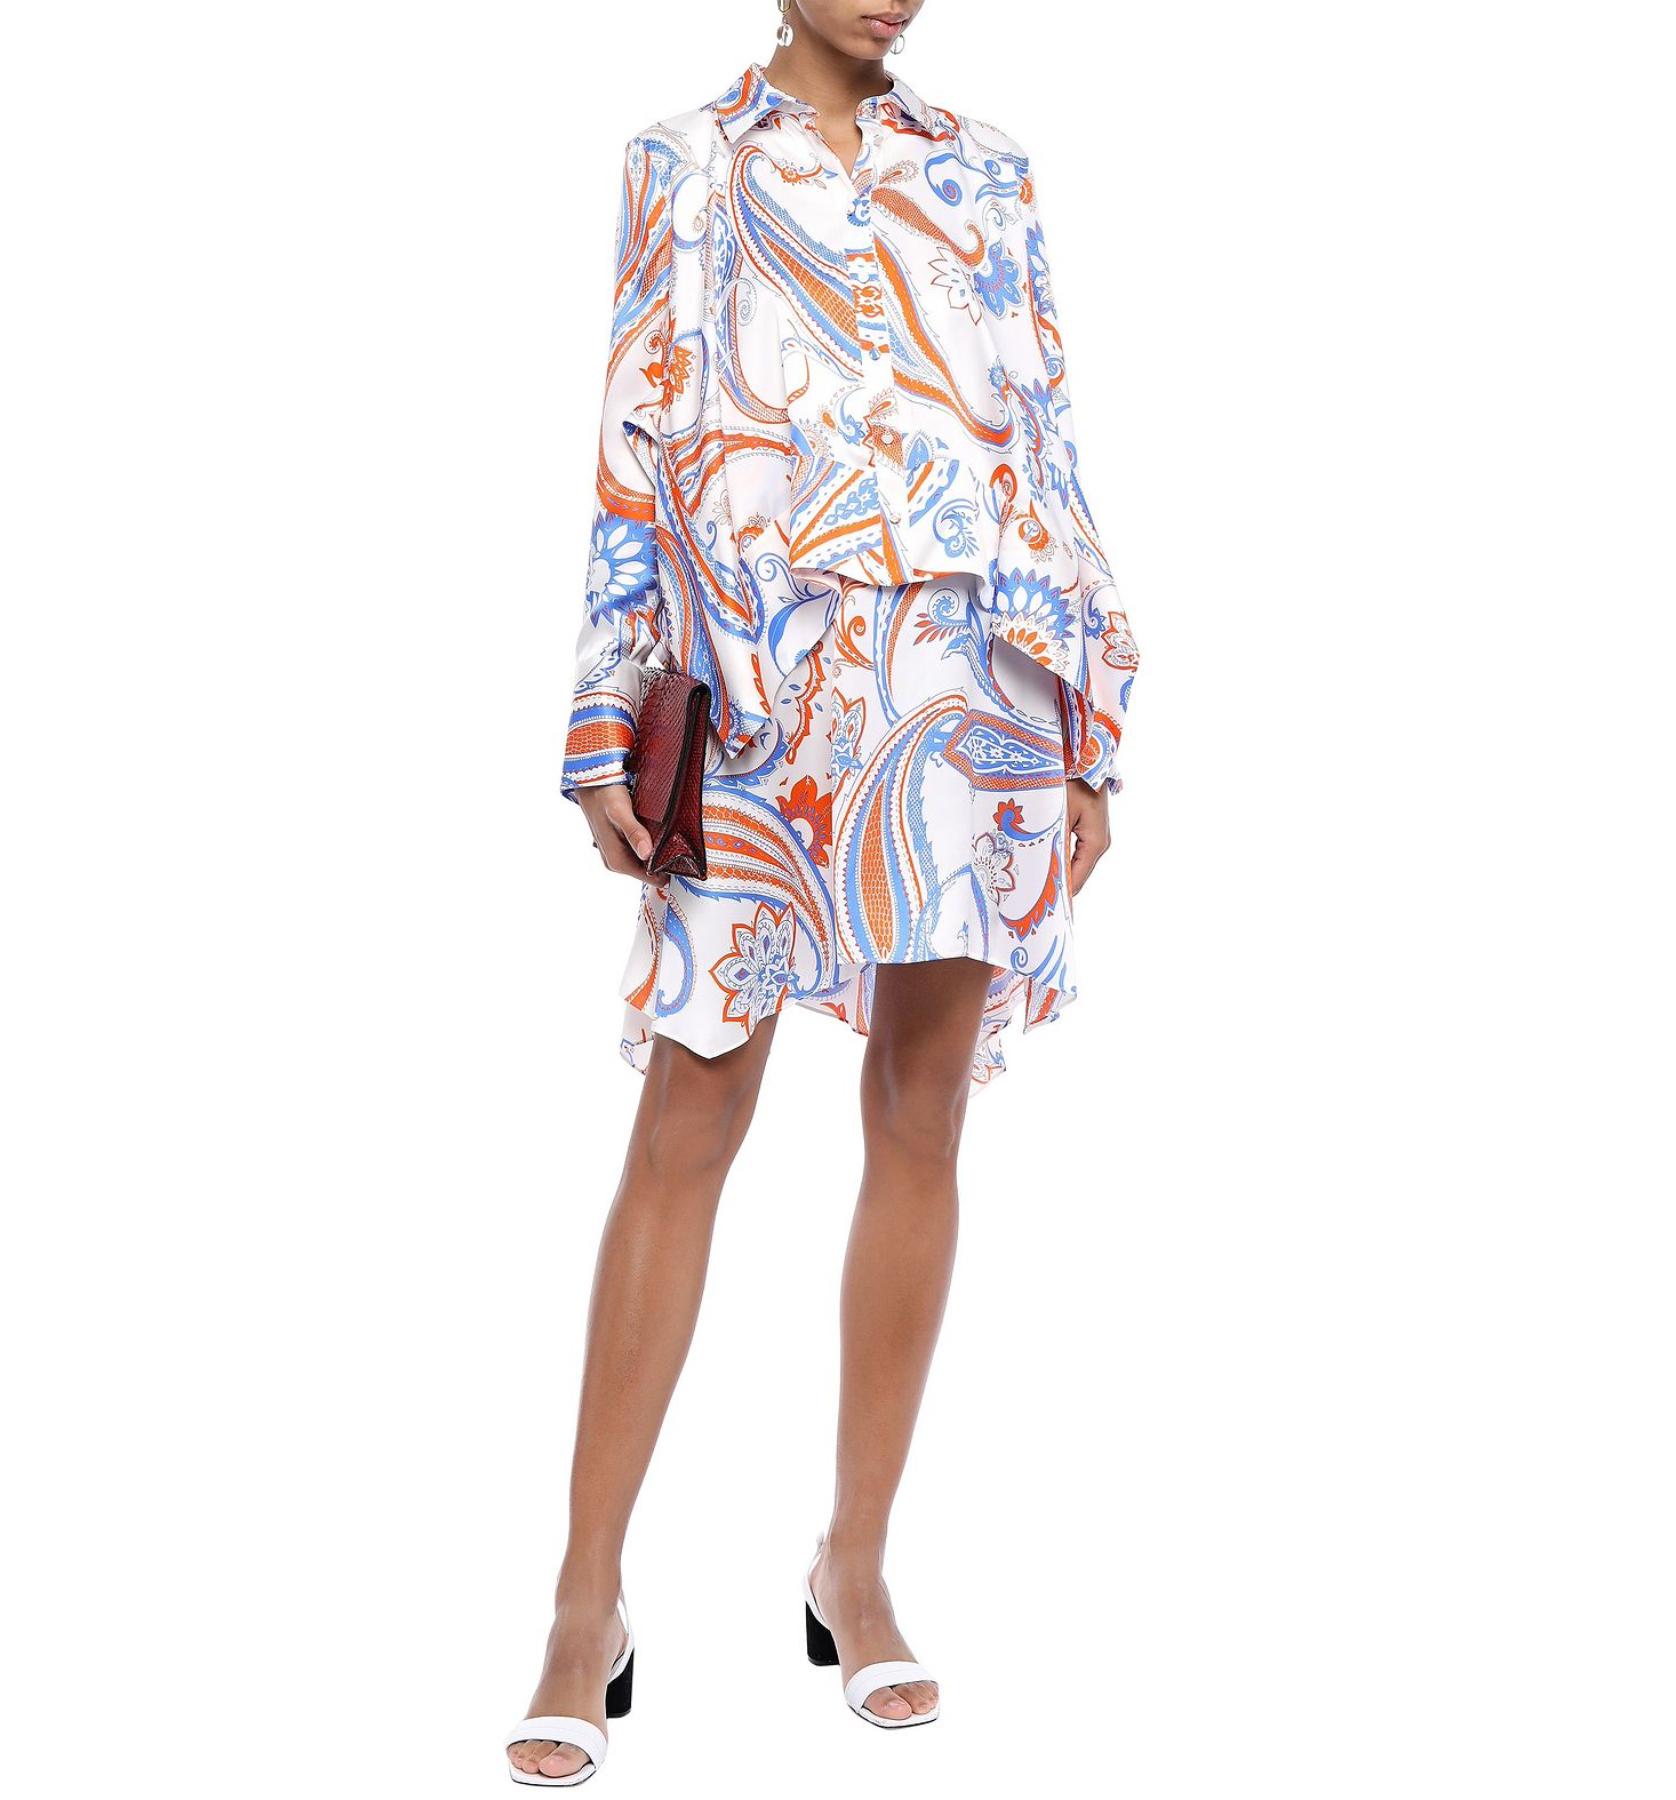 This Roberto Cavalli silk mini shirt-dress features a vibrant orange and blue paisley print, an asymmetric layered silhouette, side slip pocket, and front button fastenings. Its light and silky material makes it a perfect dress for any occasion in